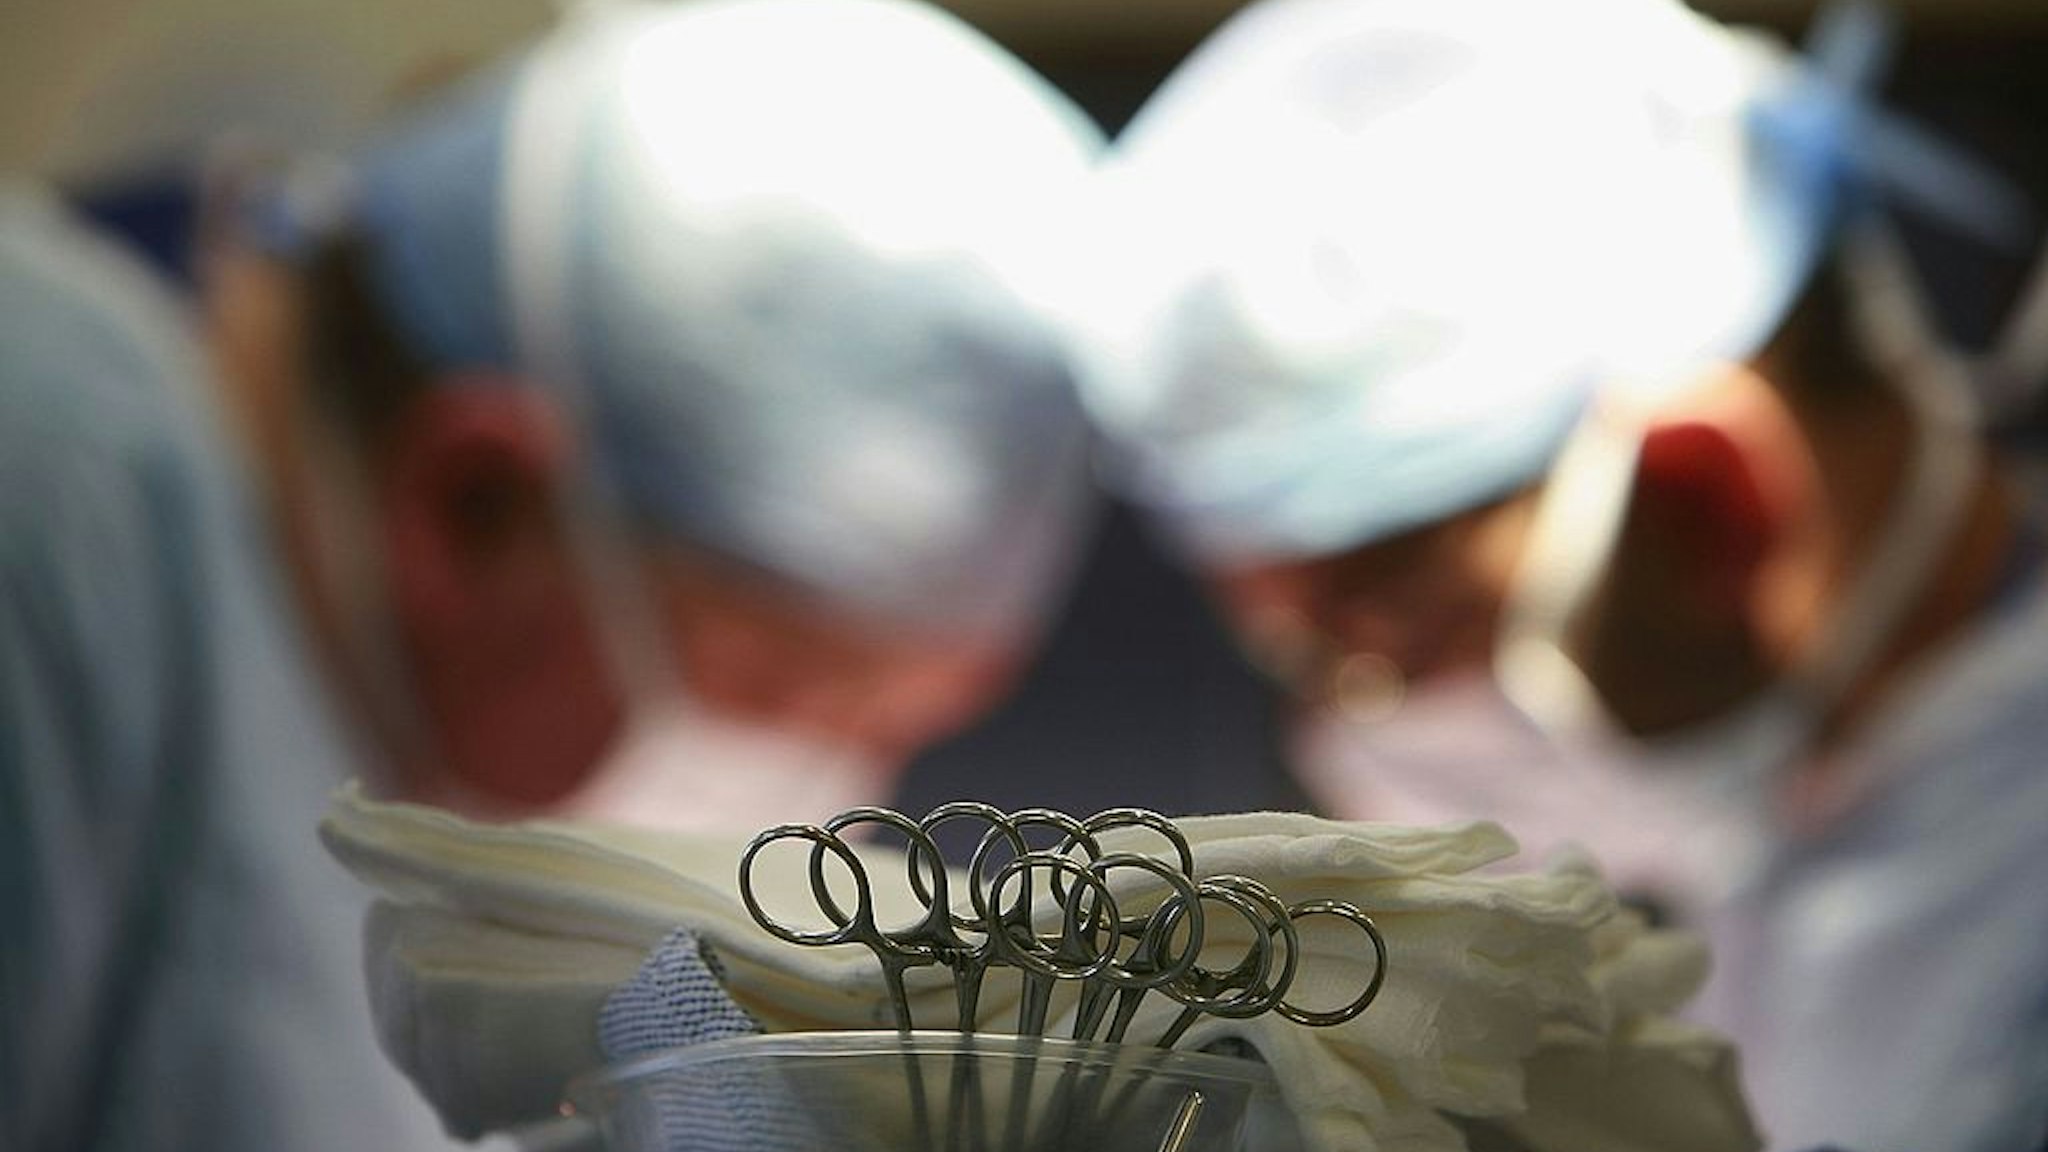 BIRMINGHAM, UNITED KINGDOM - JUNE 14: Surgeons at The Queen Elizabeth Hospital Birmingham conduct an operation on June 14, 2006, Birmingham, England. Senior managers of the NHS have said that the organisation needs to become more open in the future. (Photo by Christopher Furlong/Getty Images)